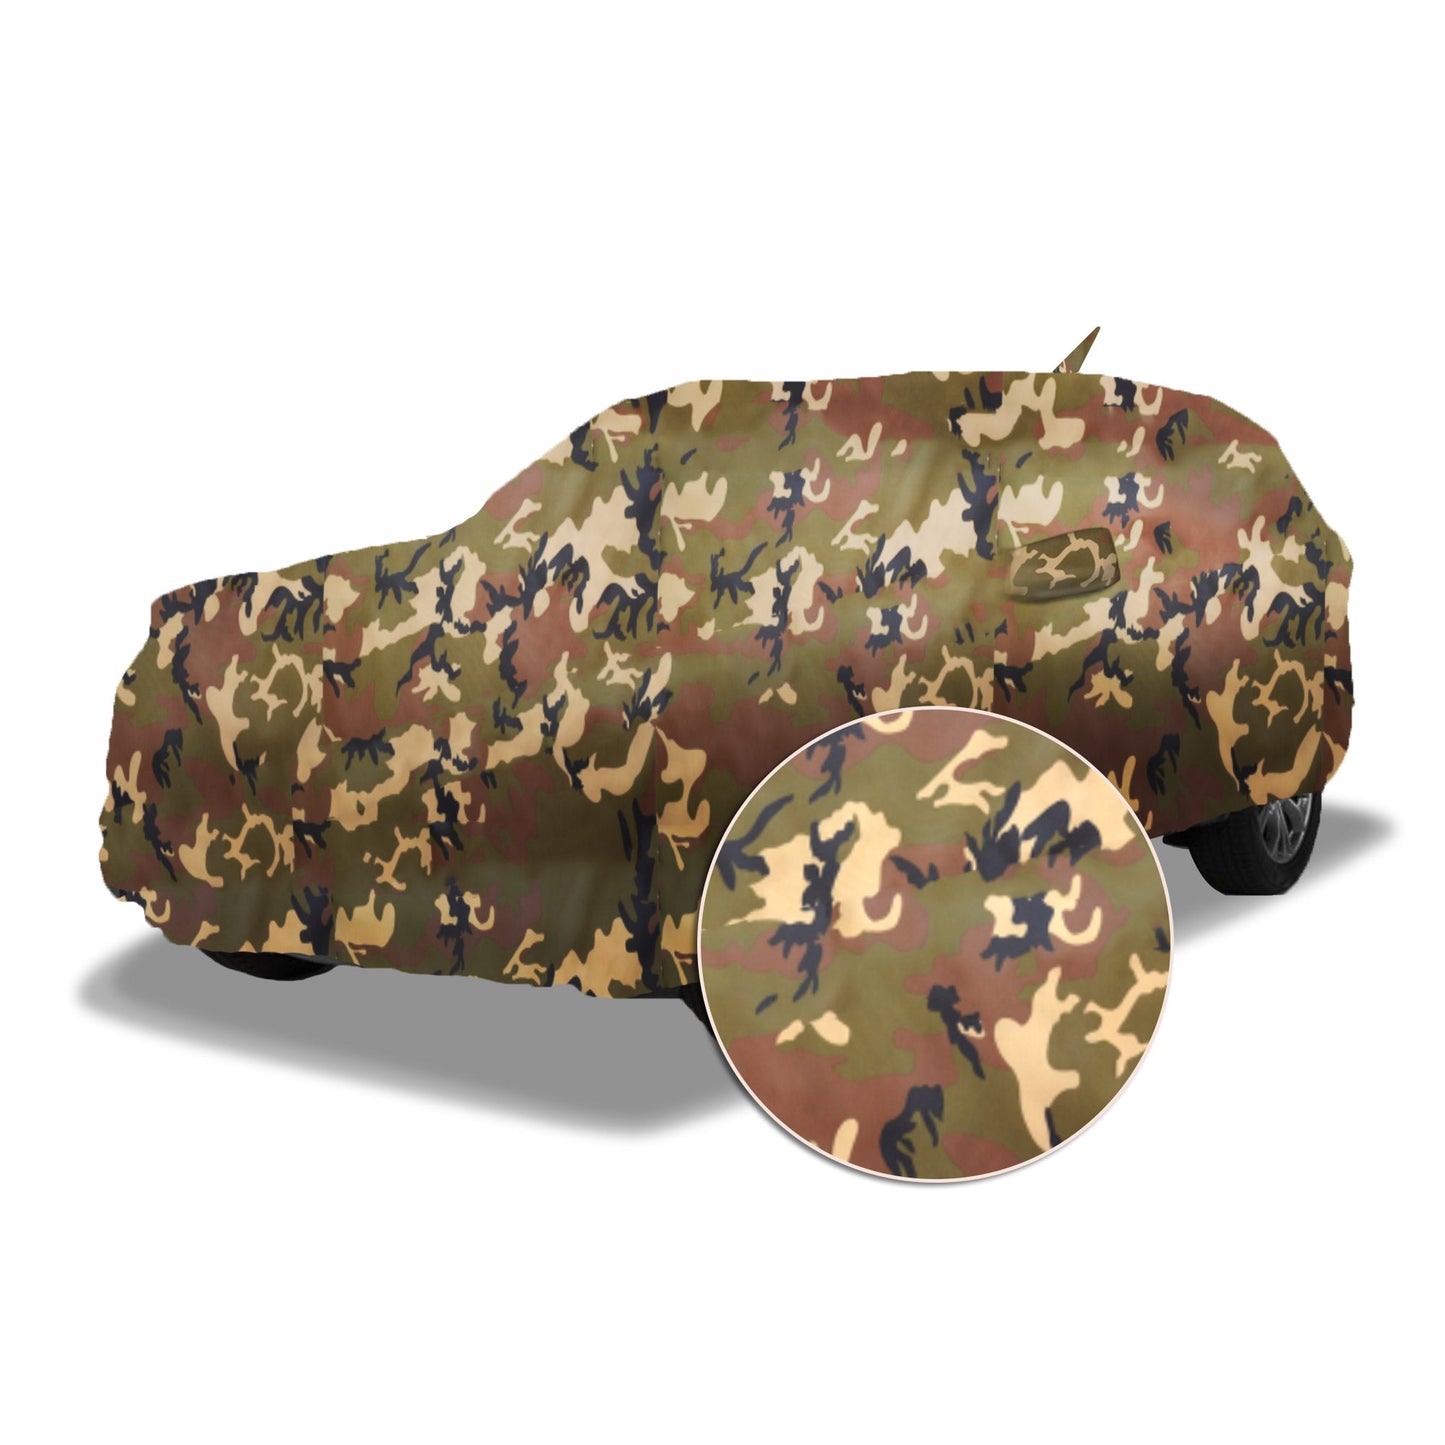 Ascot MG Hector Car Body Cover Extra Strong & Dust Proof Jungle Military Car Cover with UV Proof & Water-Resistant Coating